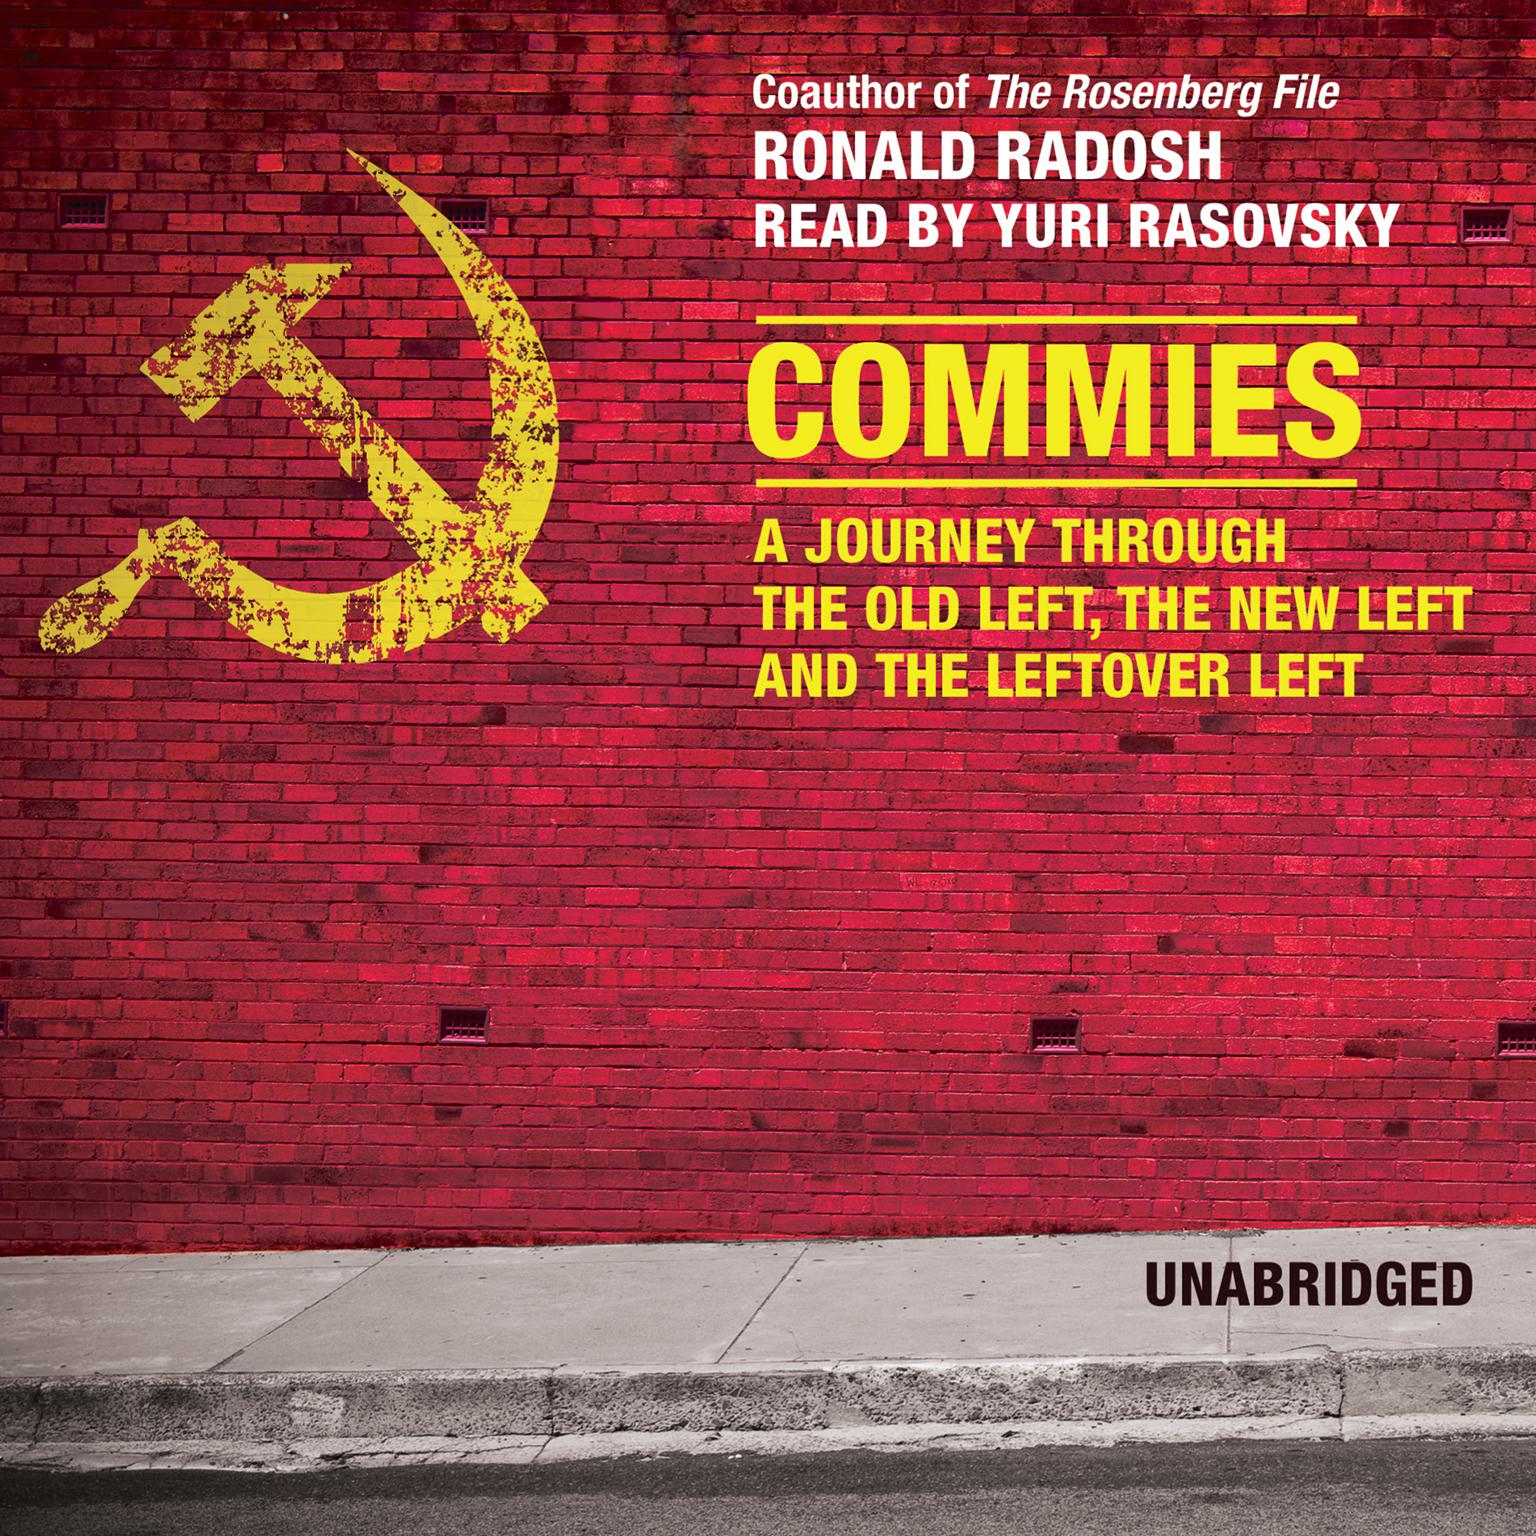 Commies: A Journey through the Old Left, the New Left, and the Leftover Left Audiobook, by Ronald Radosh